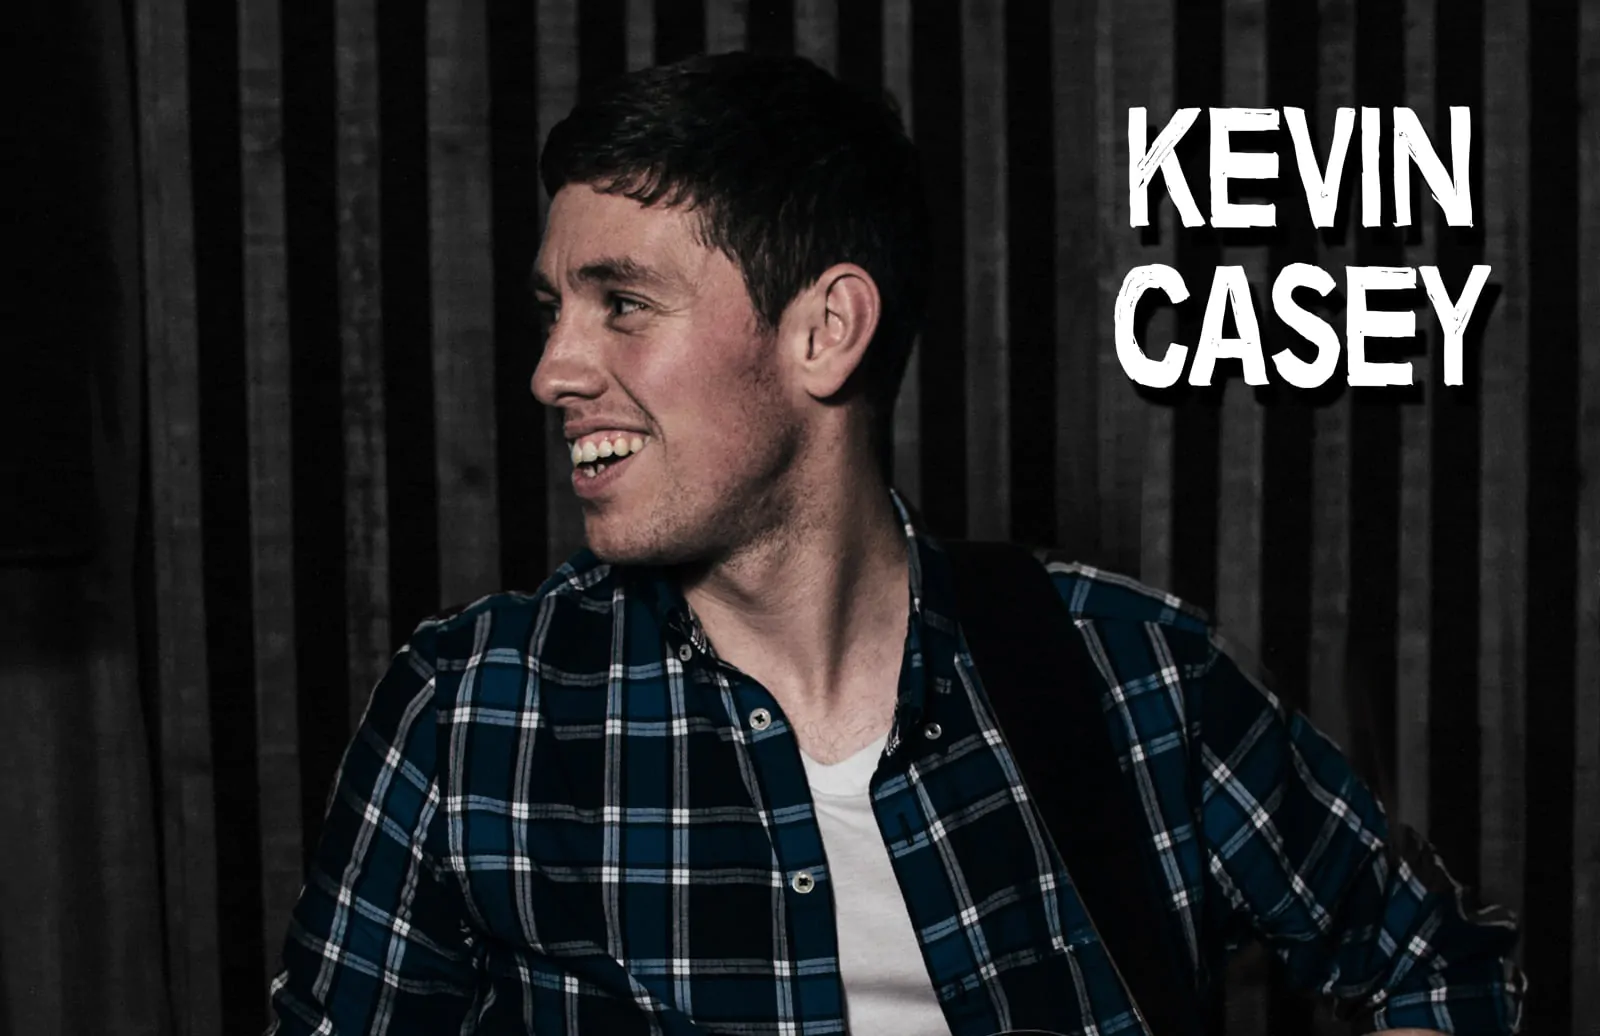 KEVIN CASEY releases indie rock anthem ‘Sing My Soul To Sleep’ – Listen Now